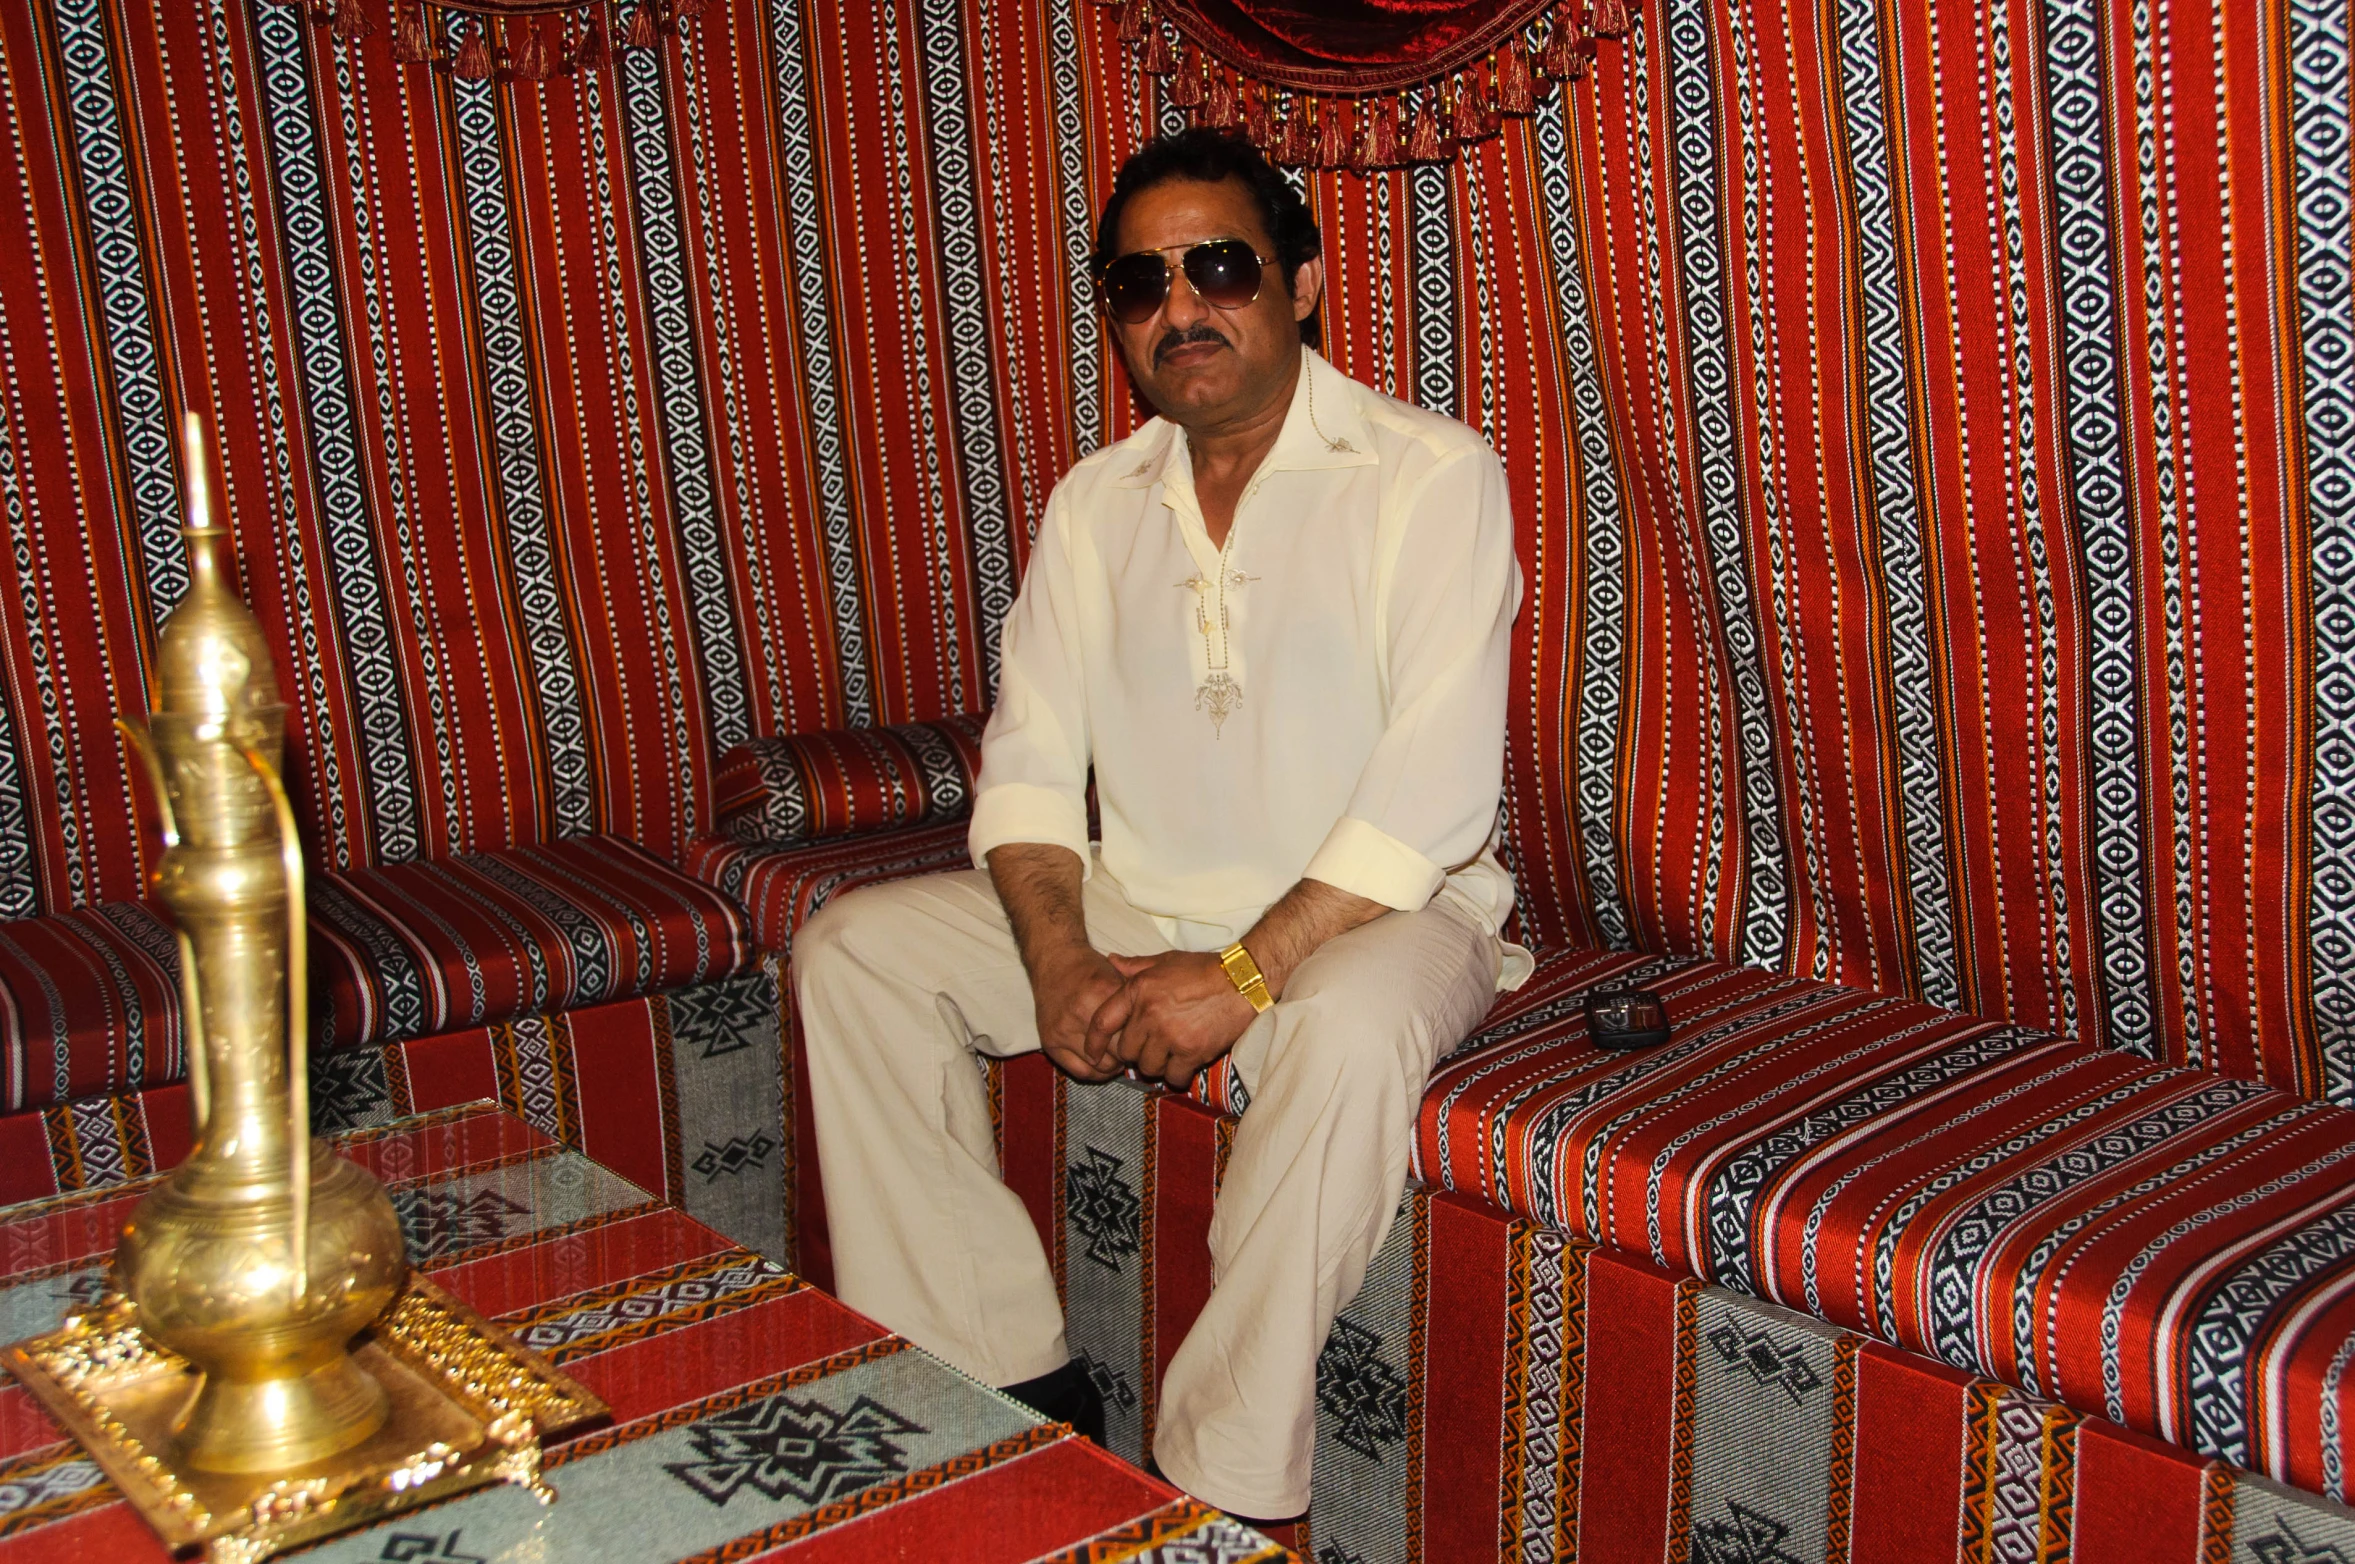 a man sitting on a couch with pillows